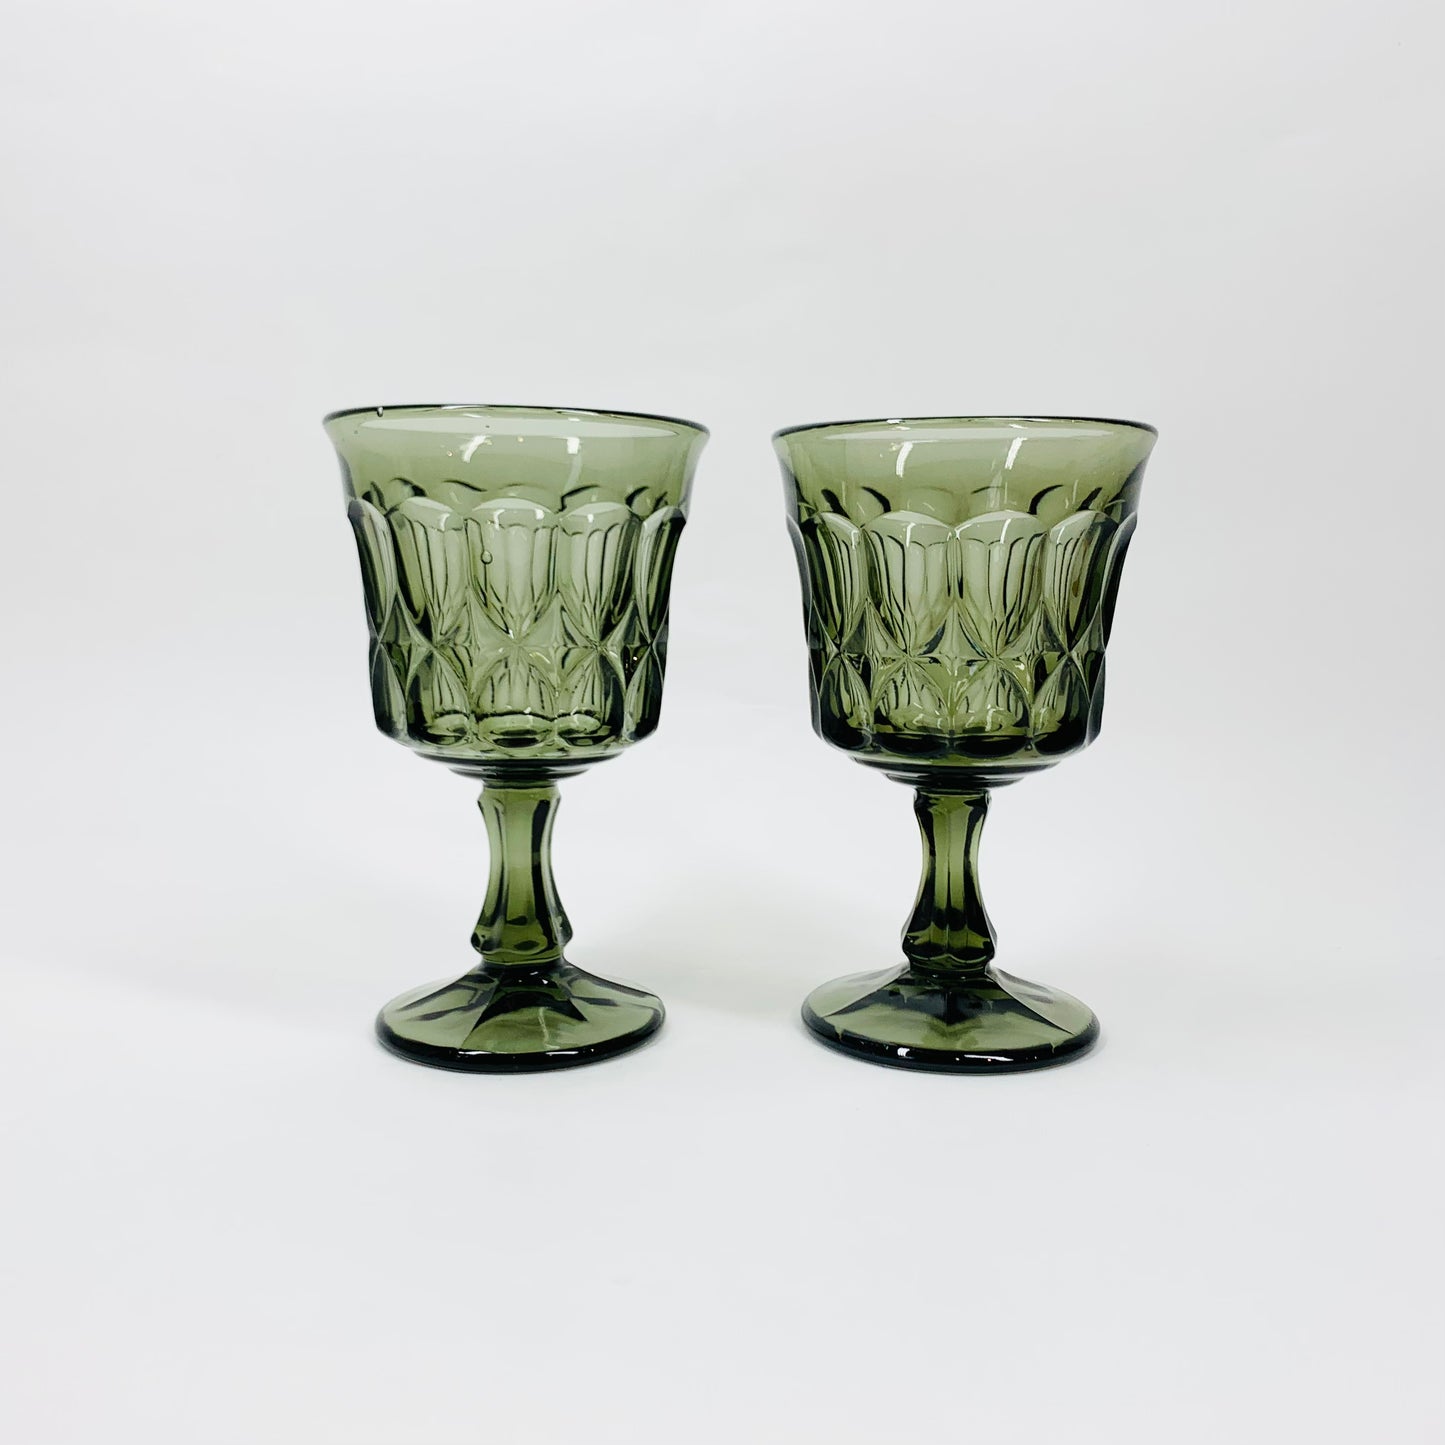 Antique Depression grey pressed glass goblets by Jeannette Glass Company